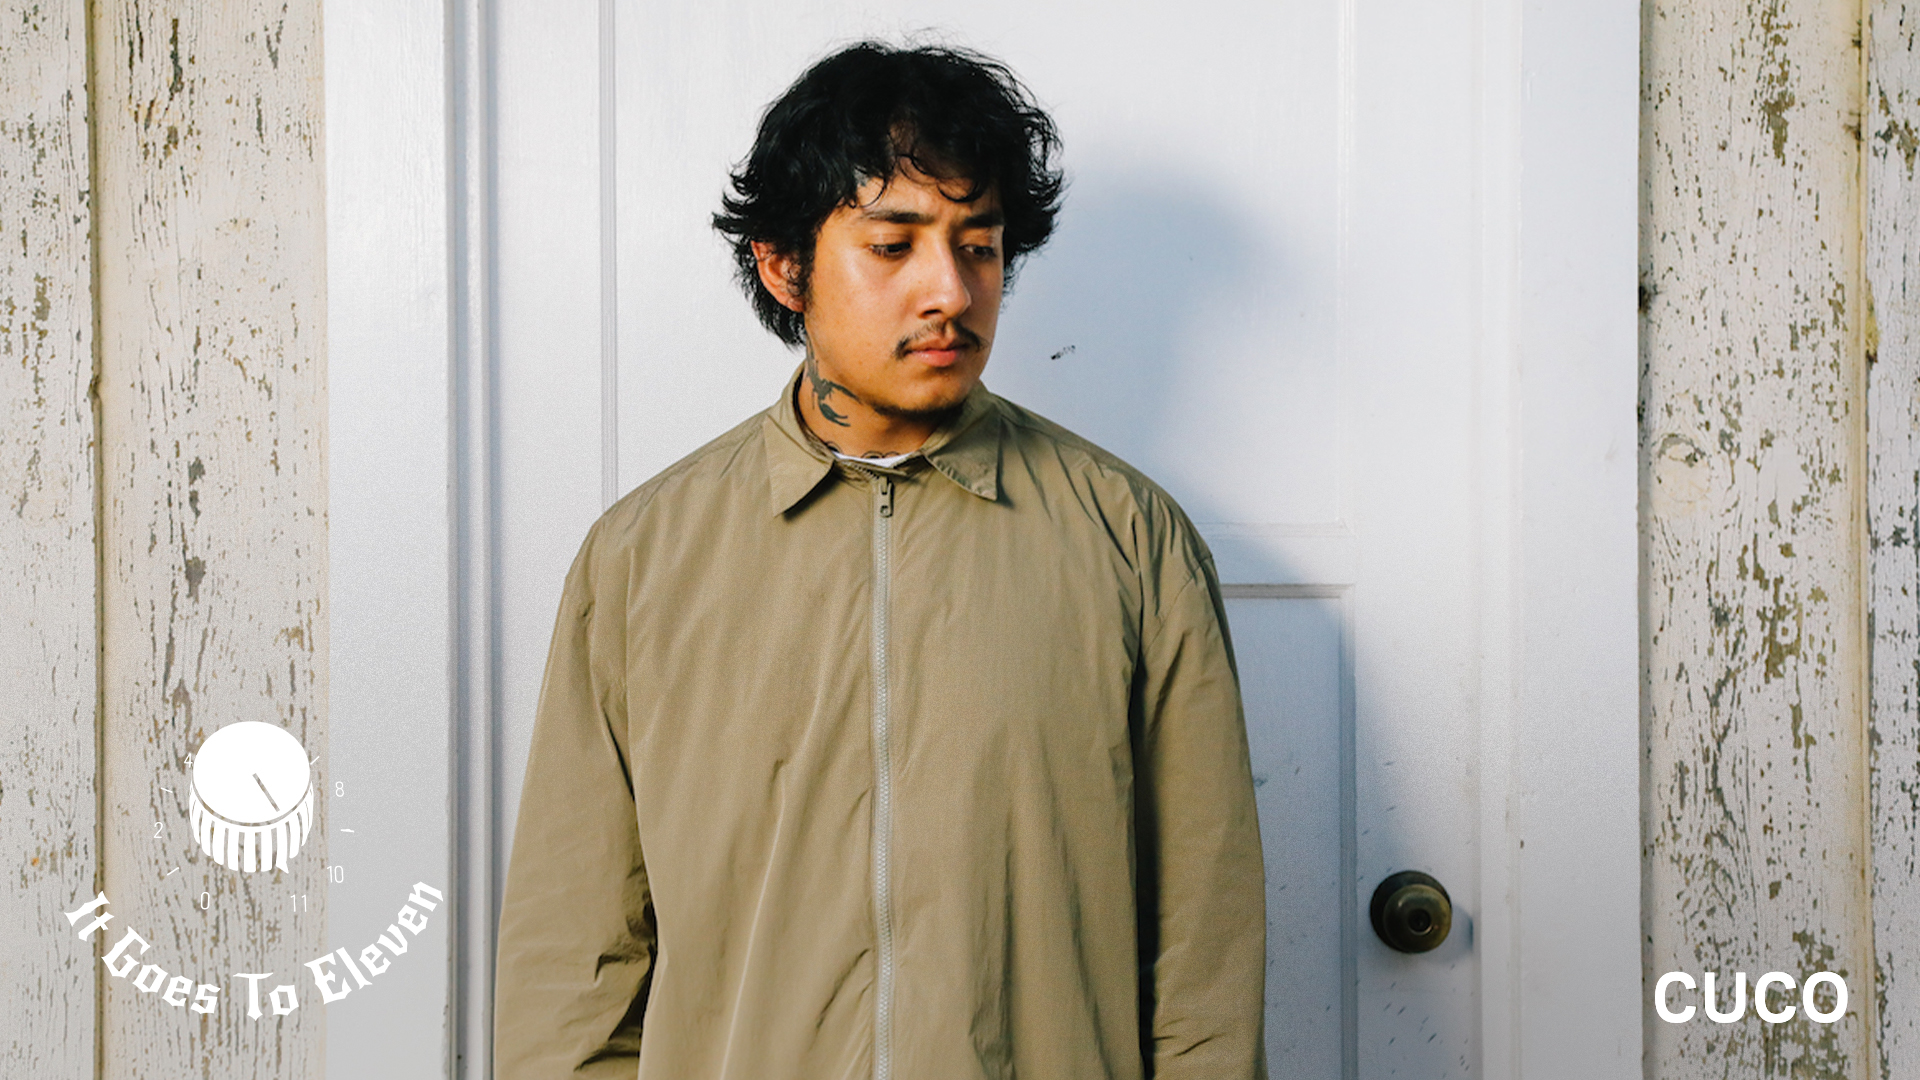 Get To Know Cuco’s Favorite Instrument